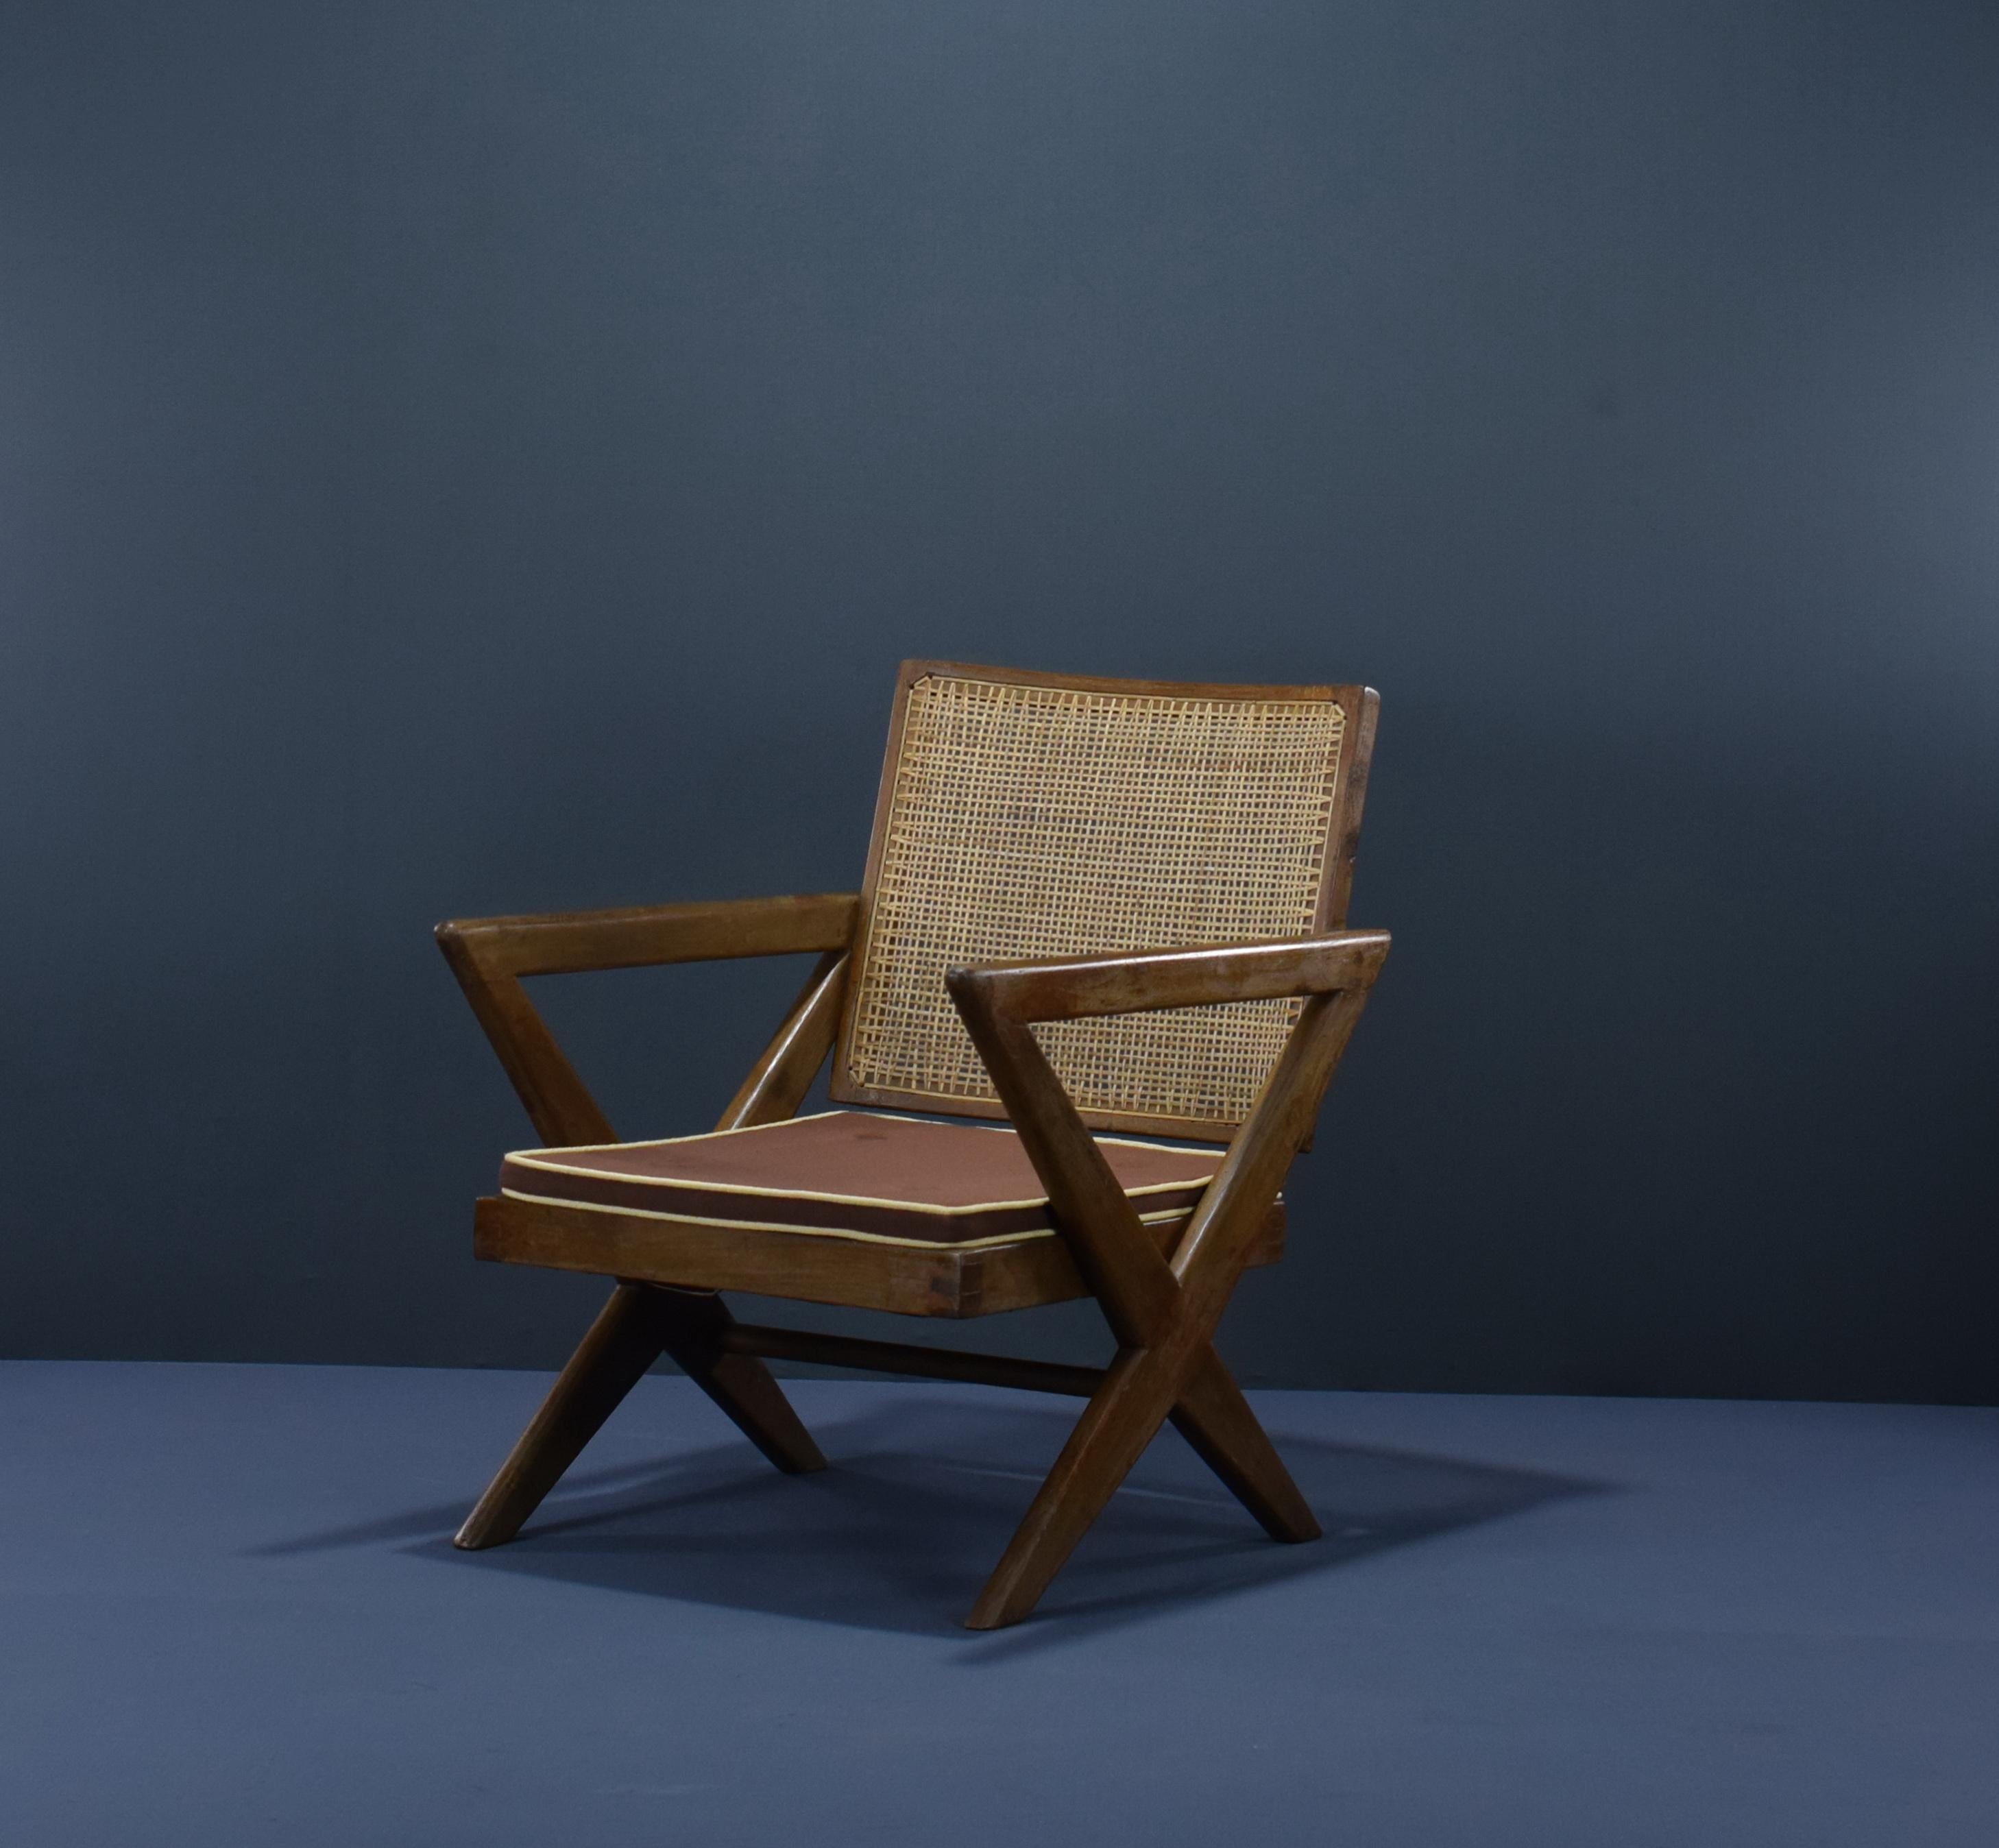 This set of two X-leg chairs is absolutely fantastic. The X-shape legs are characteristic of Pierre Jeannerets design for Chandigarh and you can see it on many objects. There is a similar type with A-legs, but this one is definitely more rare and